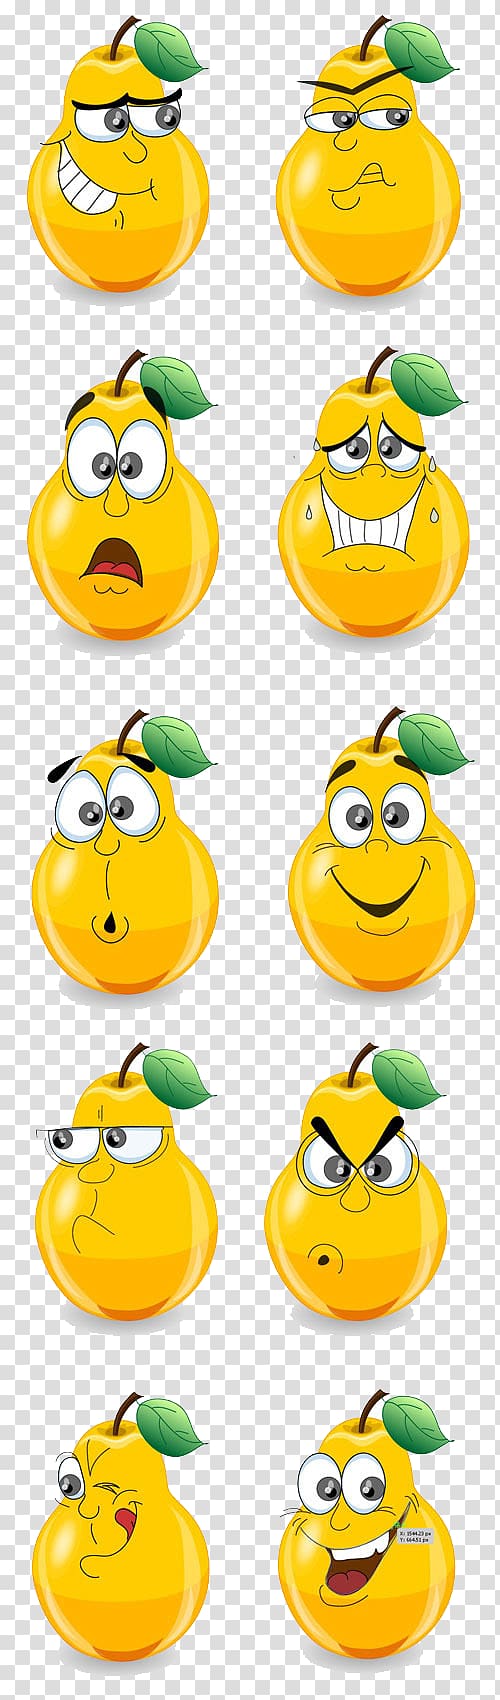 Cartoon Pear Facial expression Drawing, Cartoon pears expression material transparent background PNG clipart